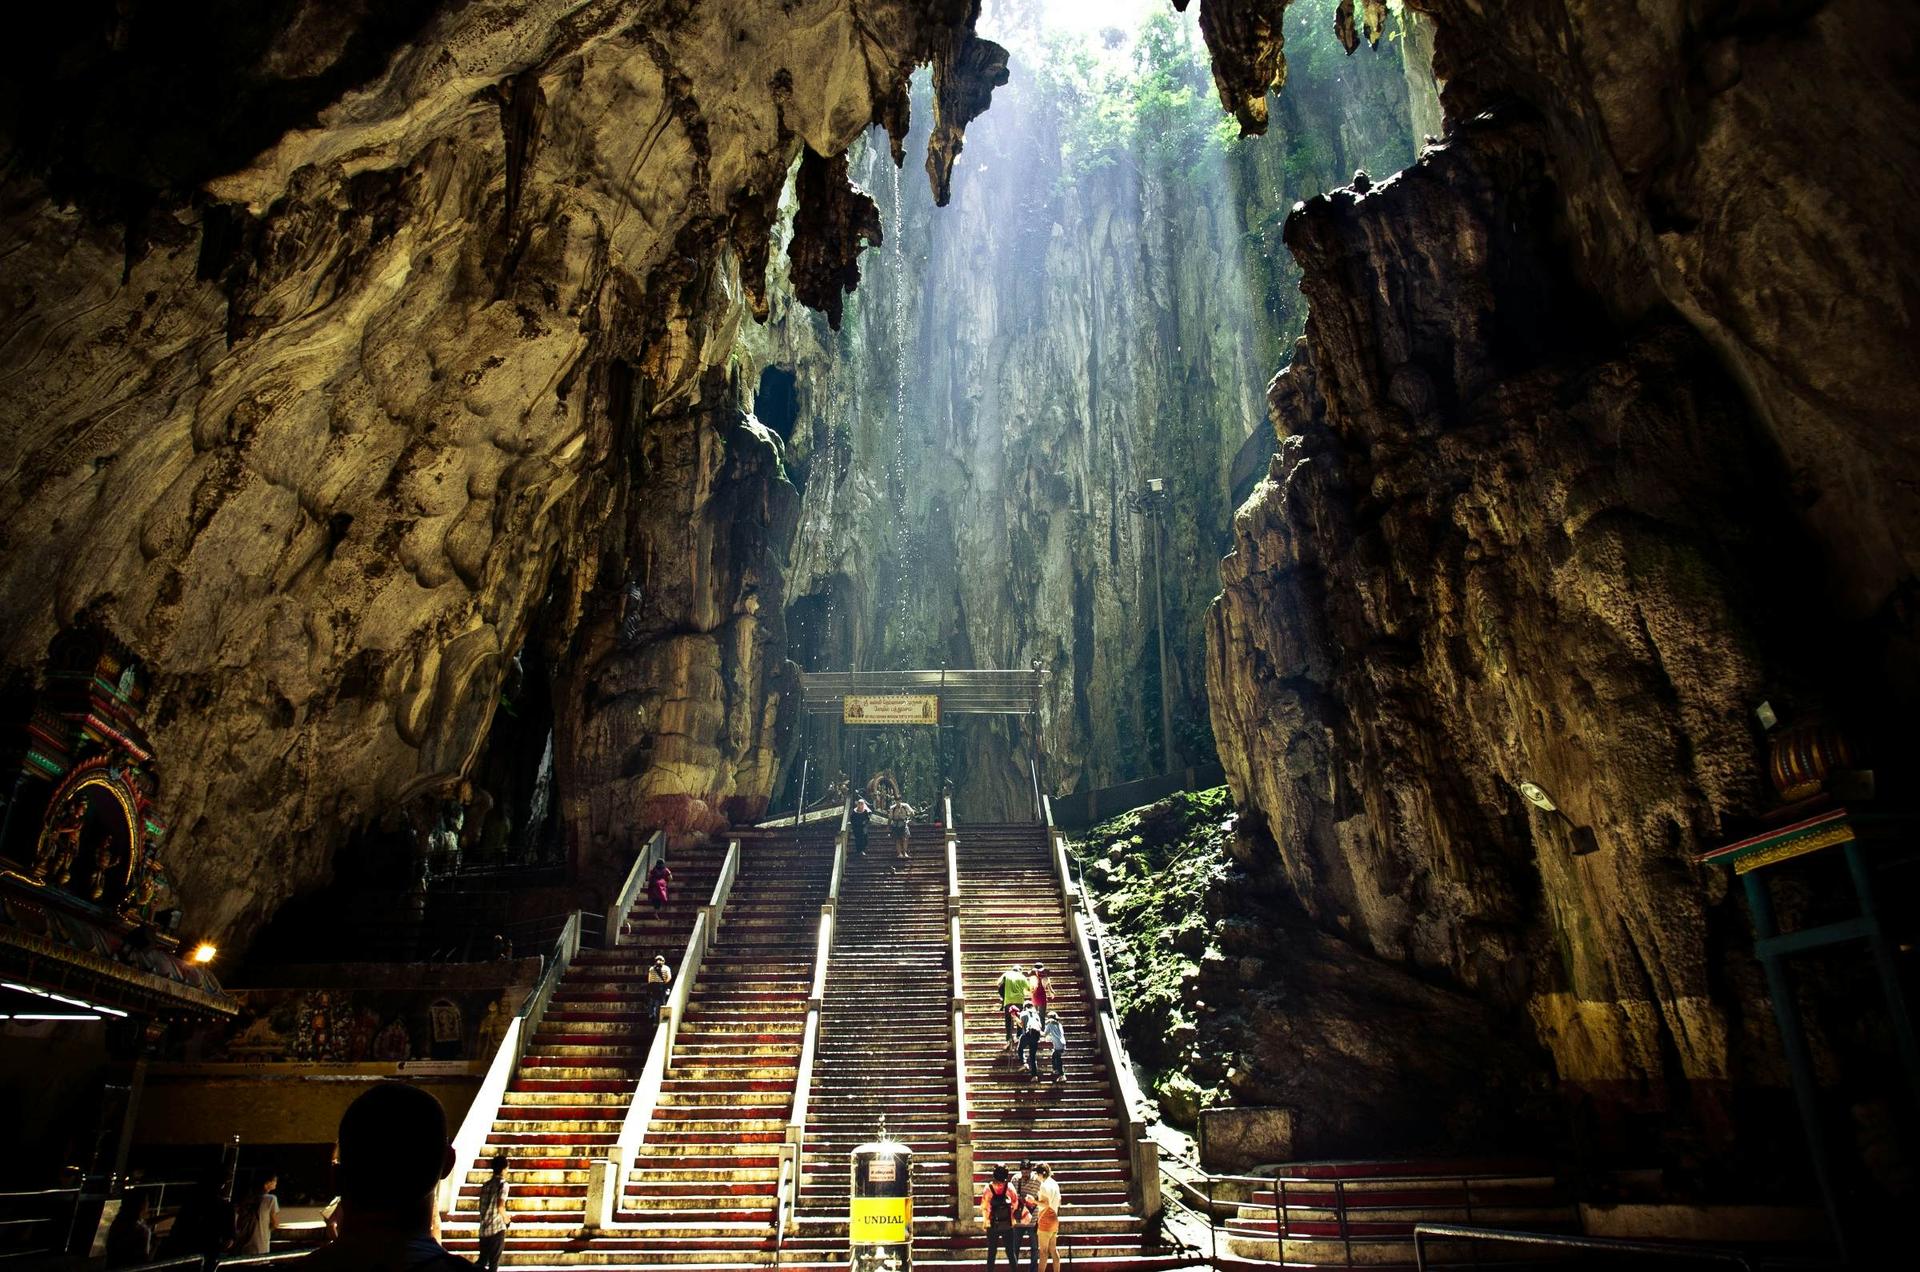 The interior of the Batu Caves near Kuala Lumpur in Malaysia. There are stairs leading further into the cave, while the walls consist of jagged rock. The roof is open, and light streams down from above.